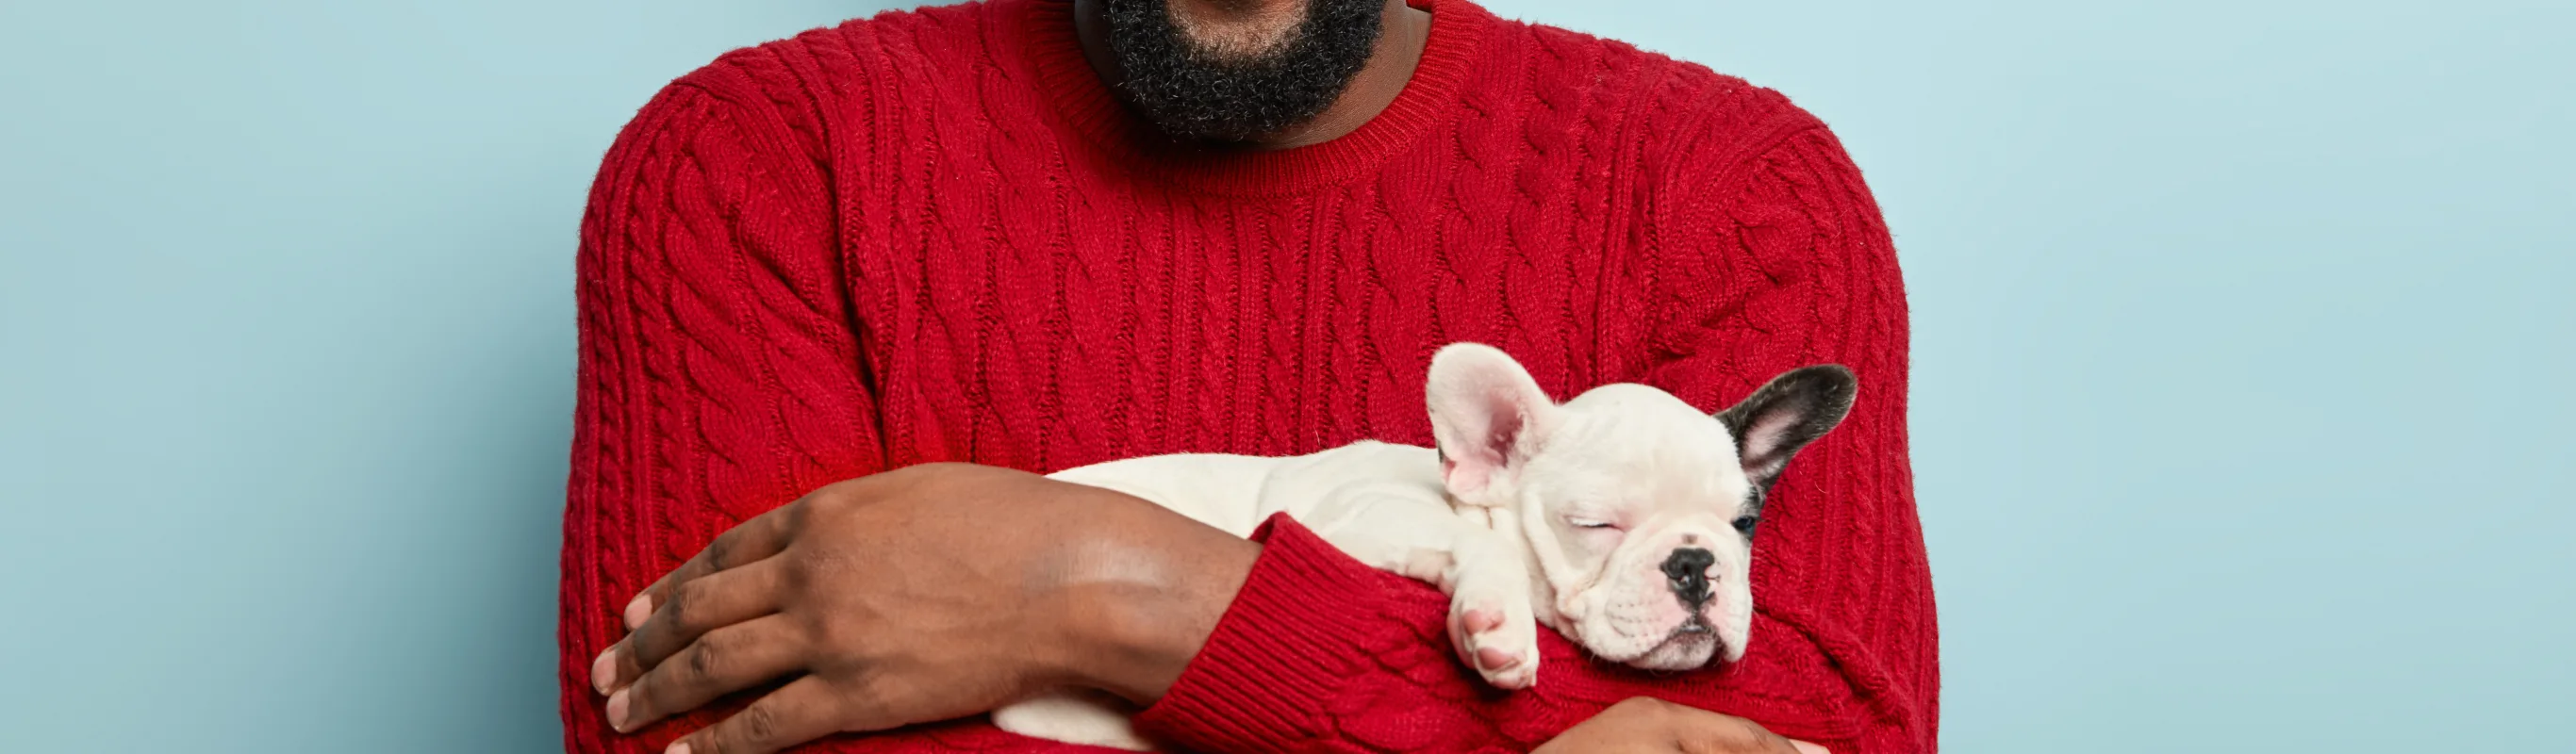 Red shirt on a man holding a dog